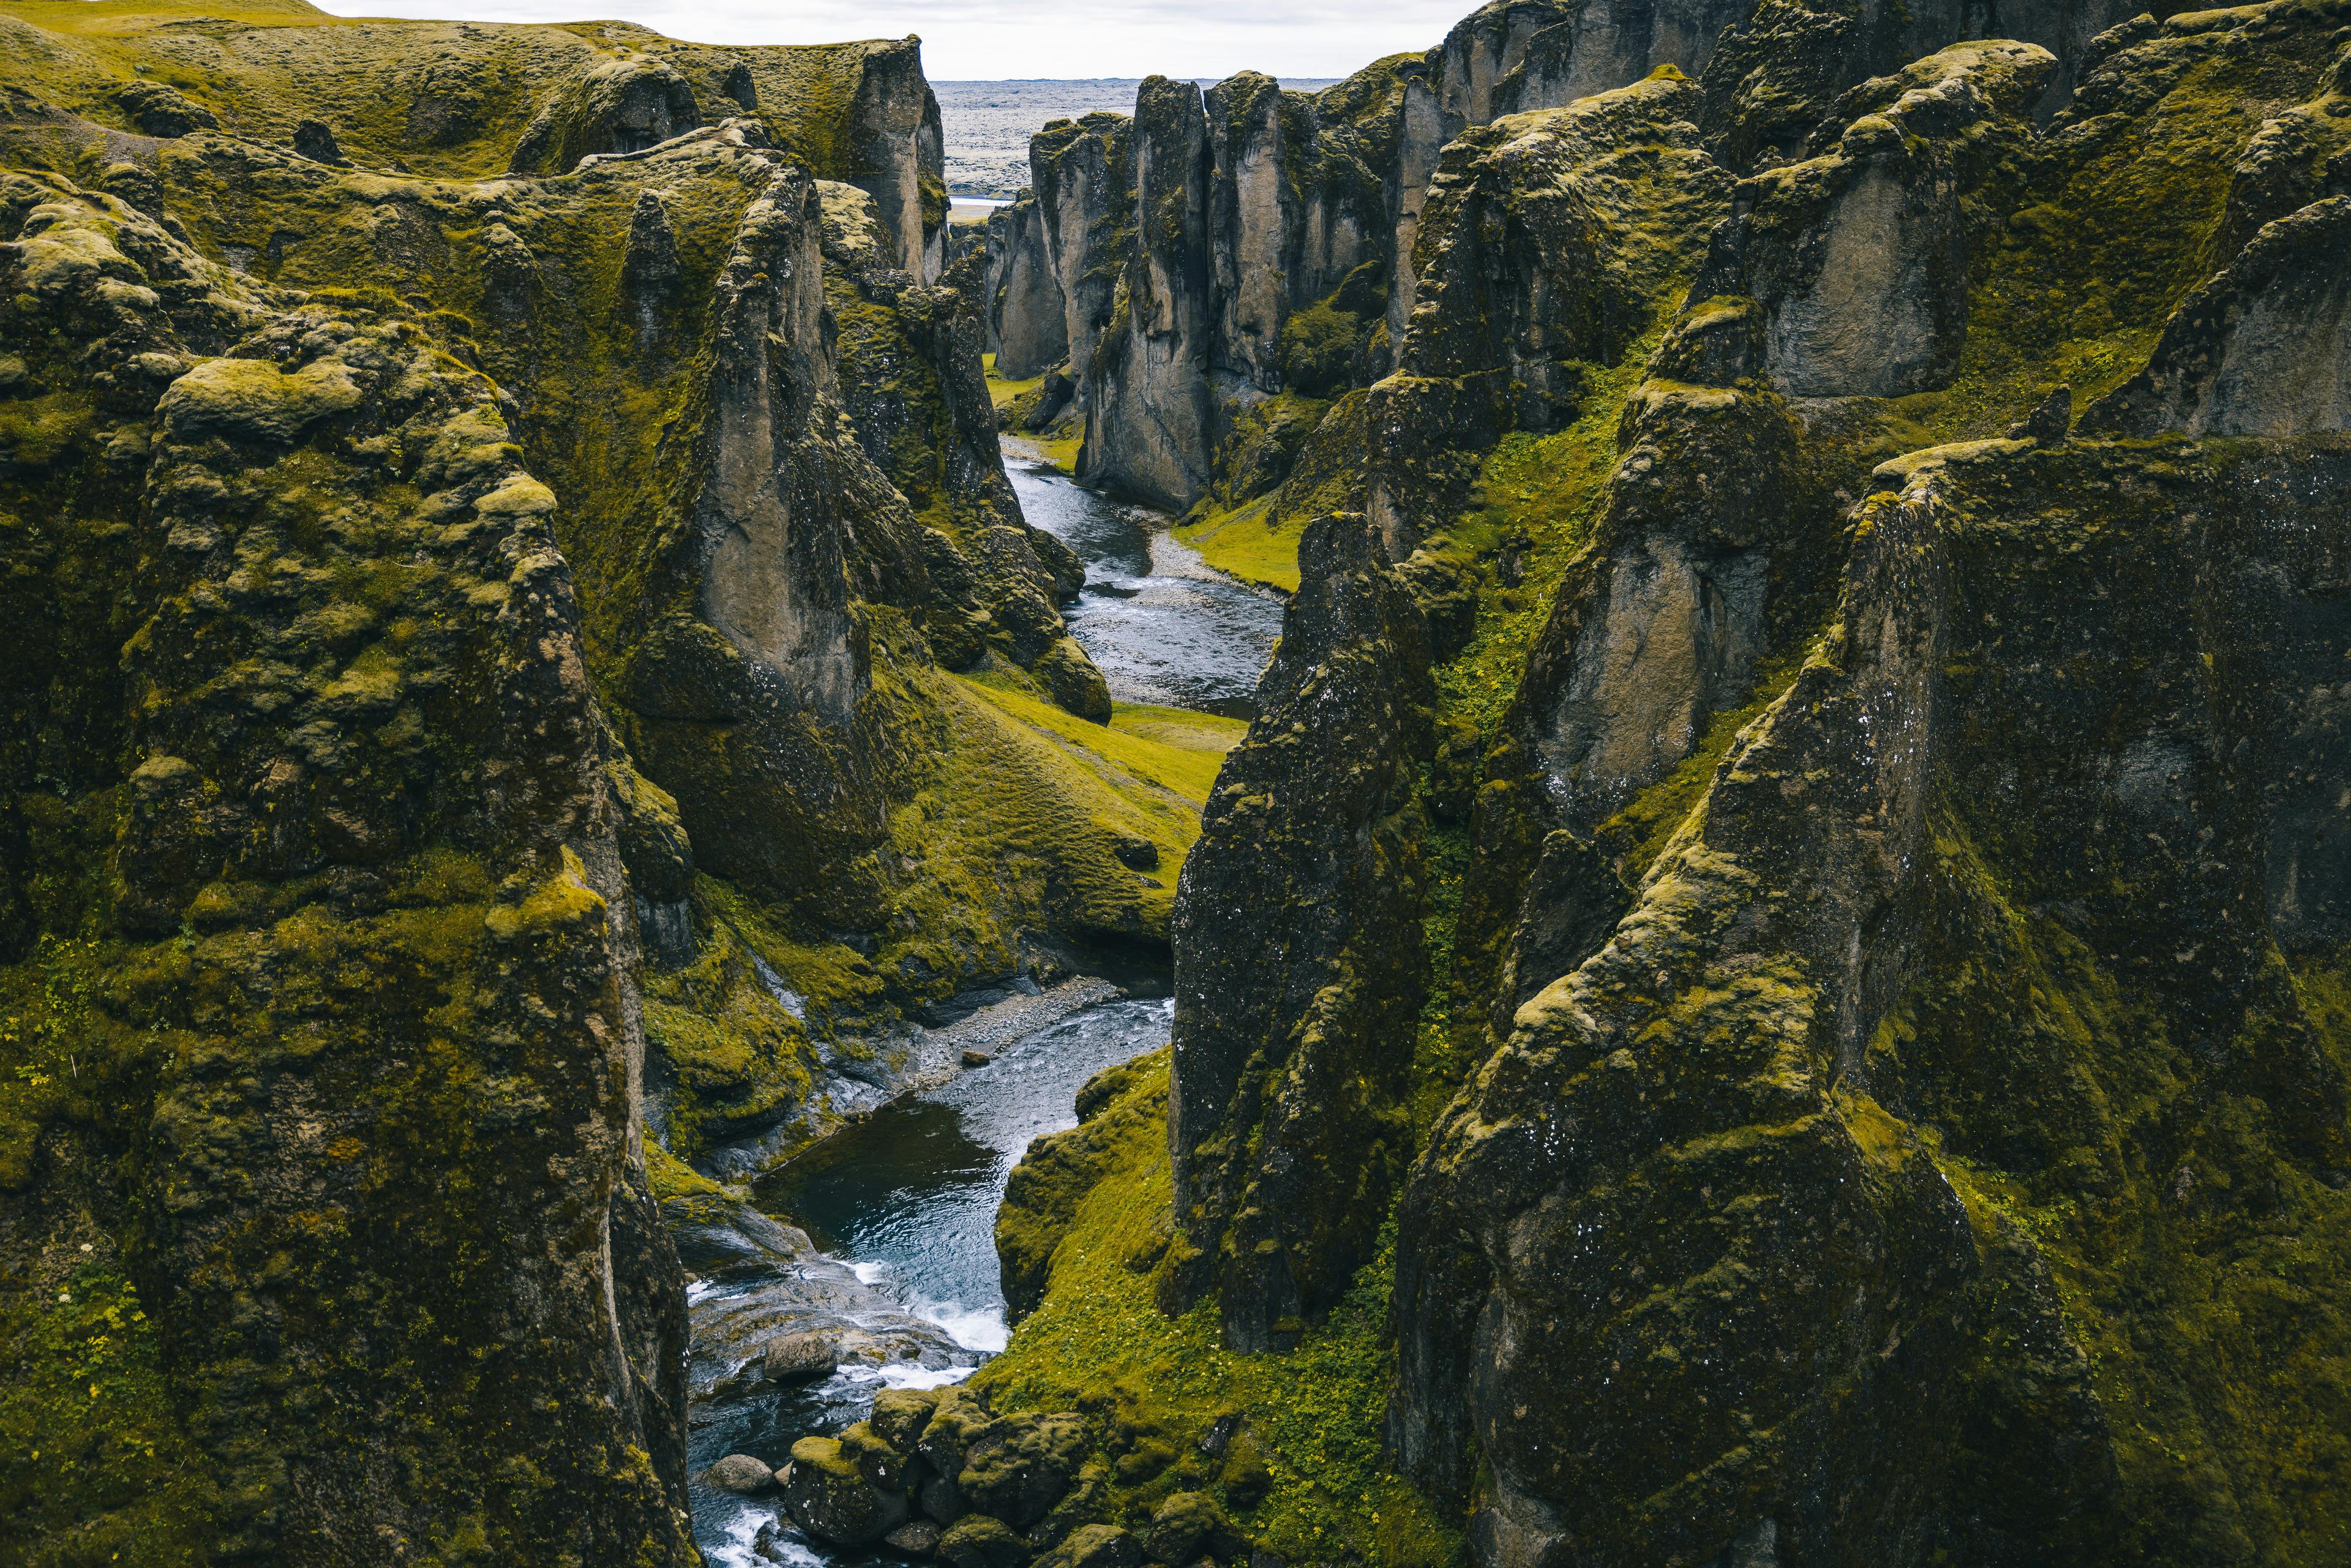 Aerial view of a sinuous river winding through a rugged landscape covered in green moss.